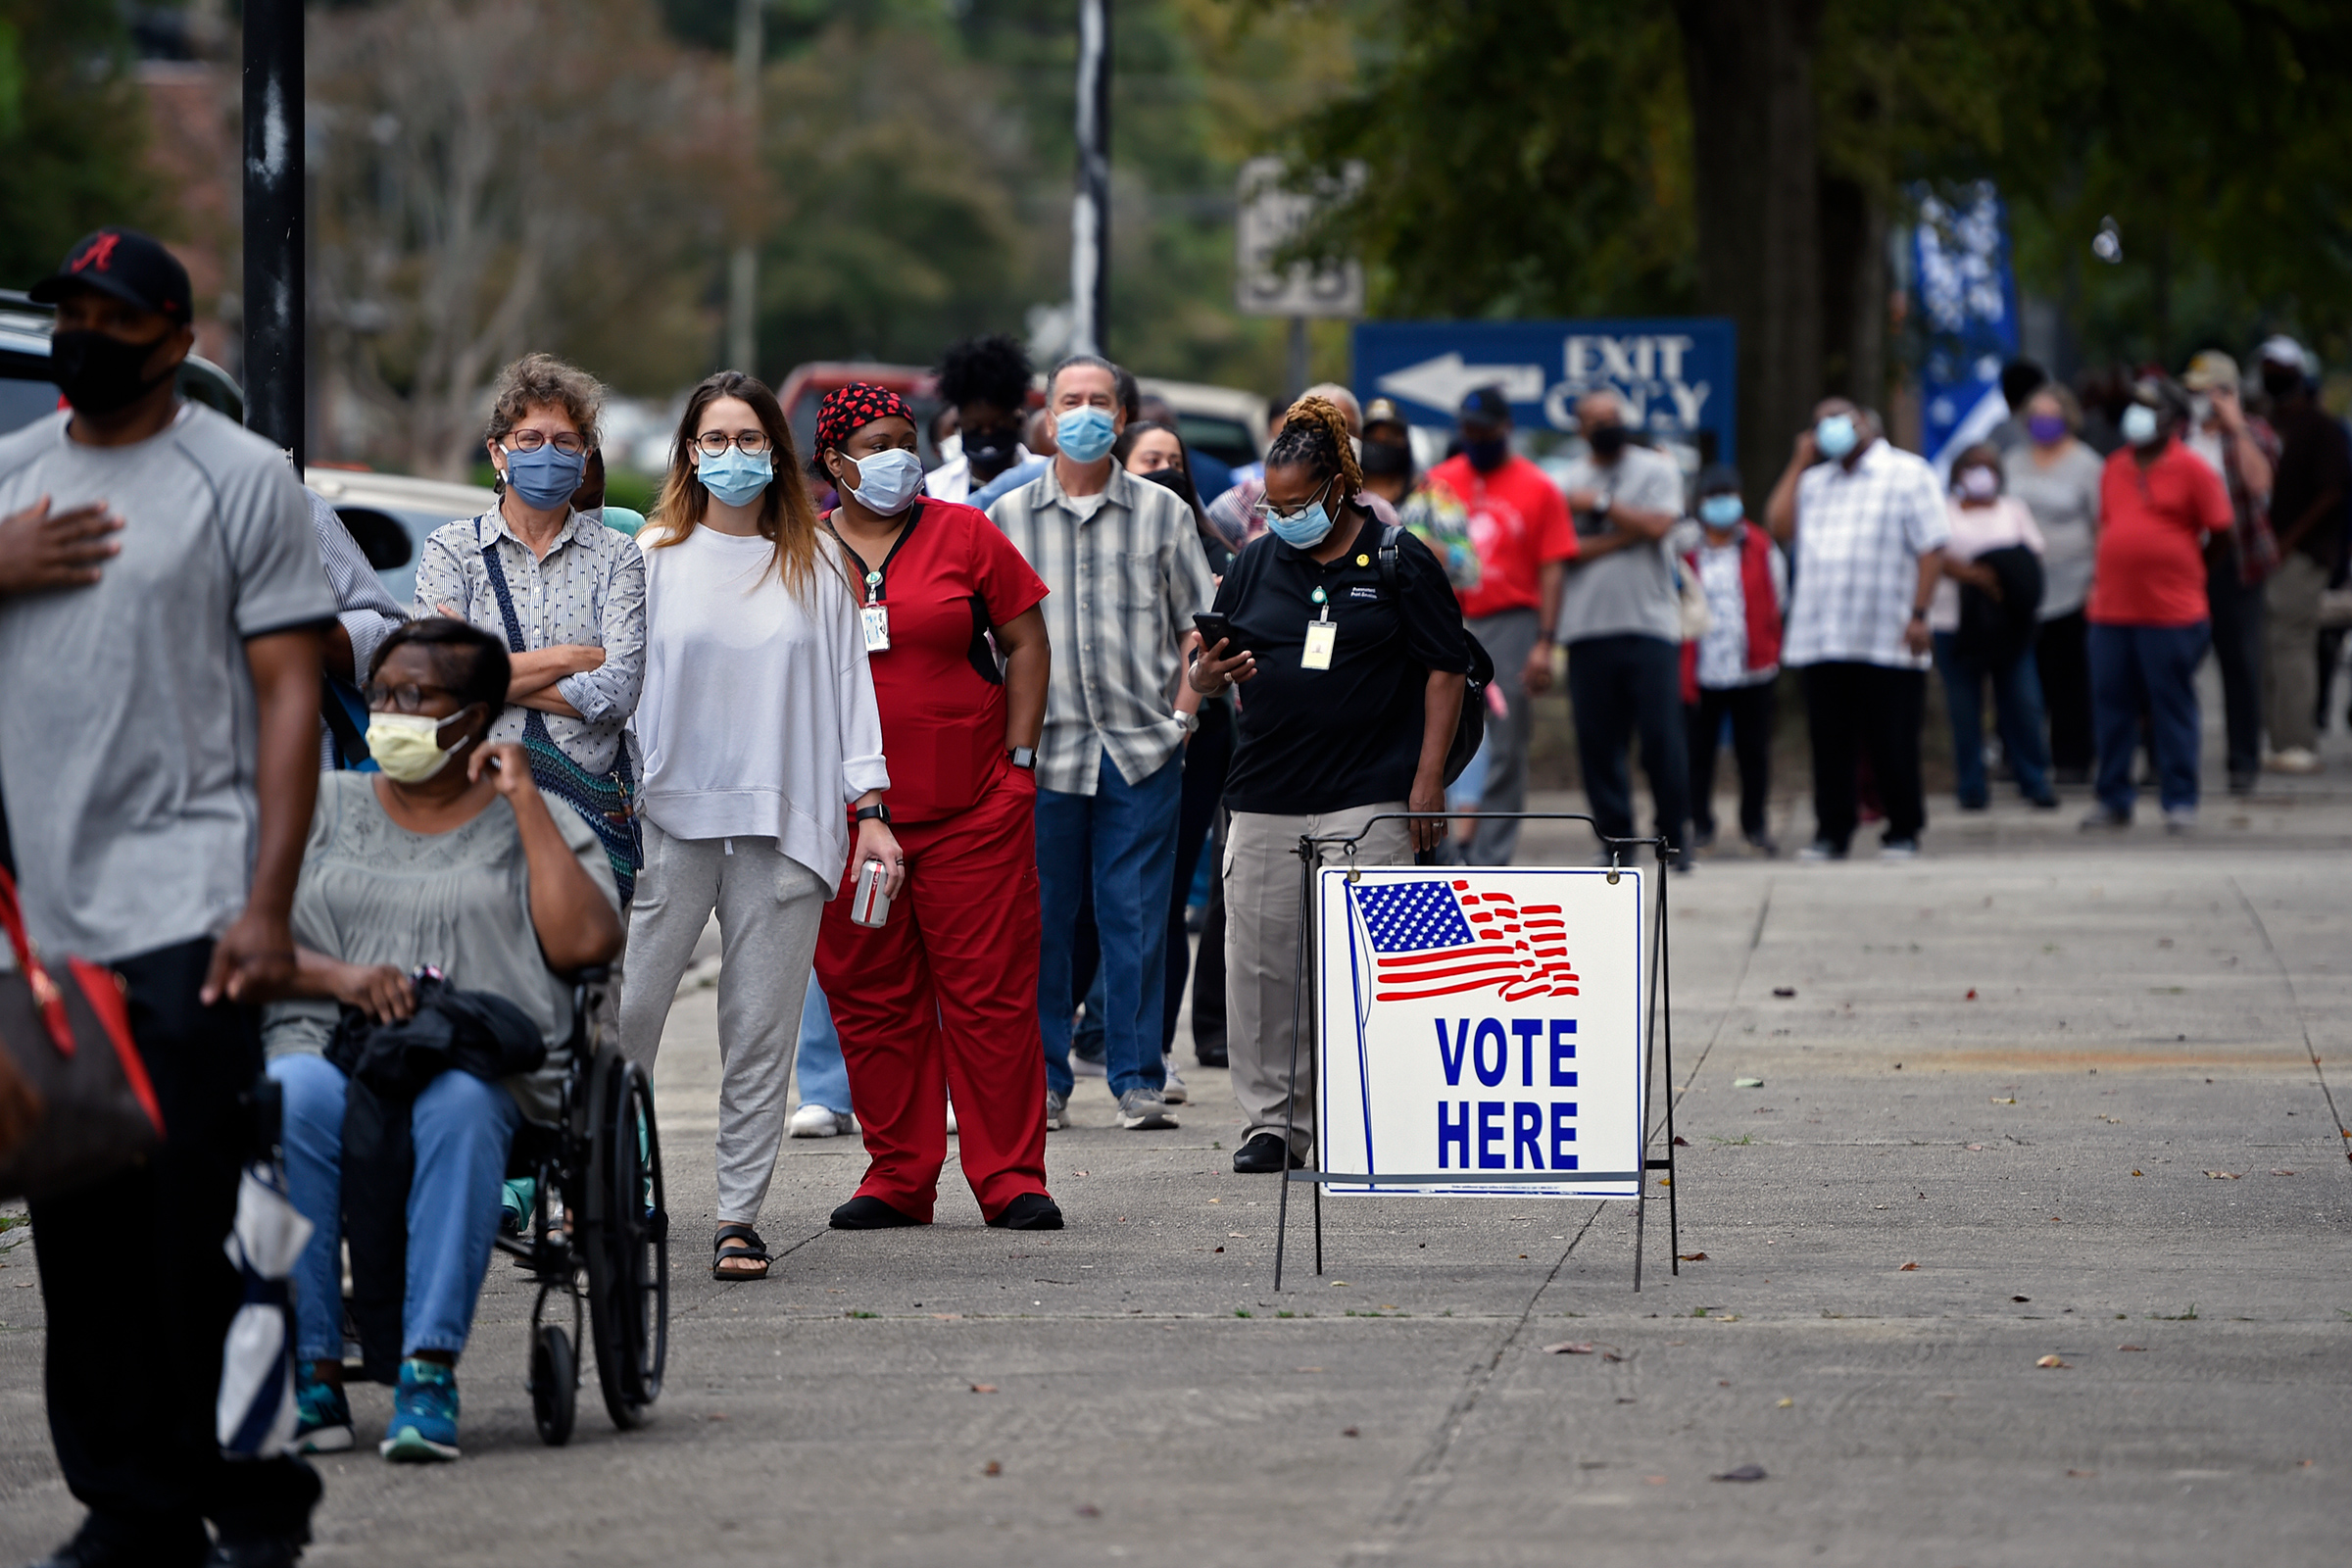 People wait in line for early voting at the Bell Auditorium in Augusta, Ga on Oct. 12, 2020. (Michael Holahan—The Augusta Chronicle/AP)